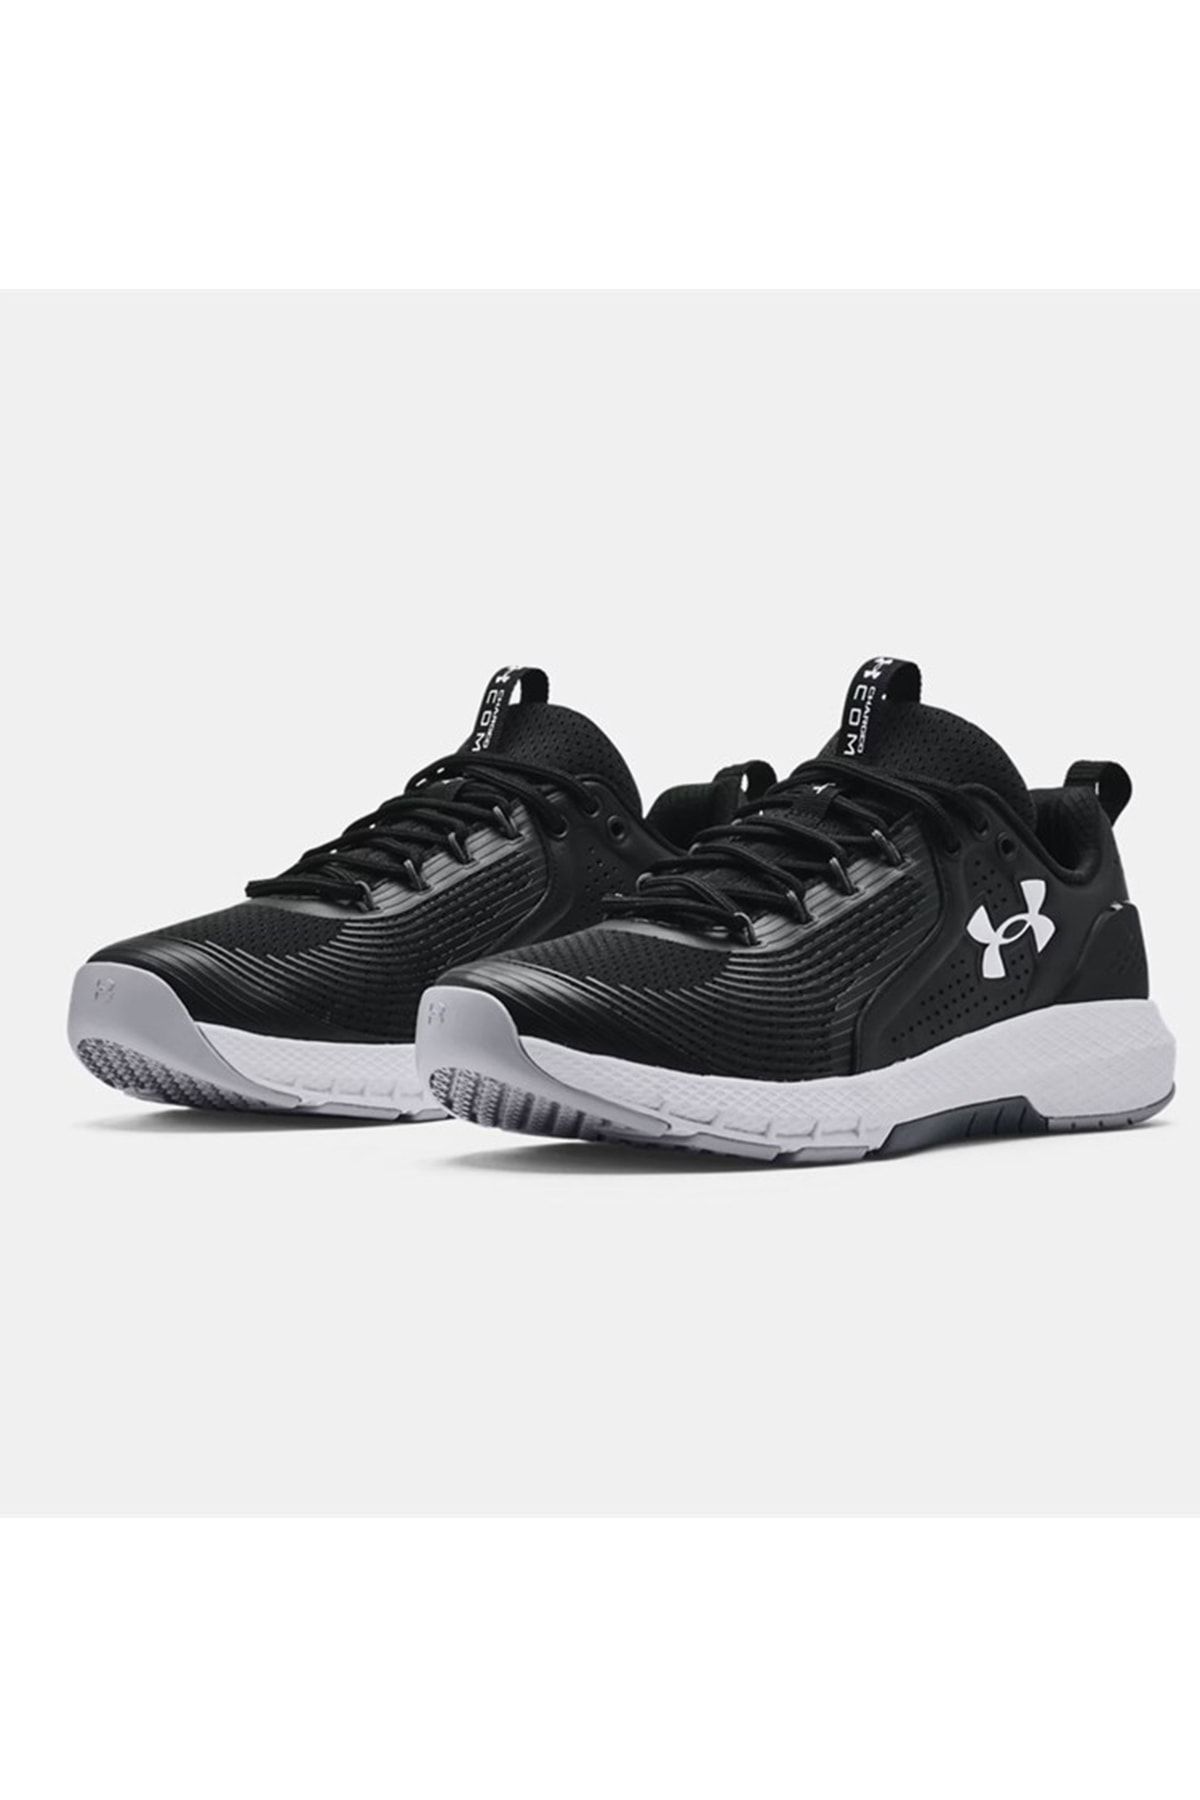 Under Armour Ua Charged Commit Tr 3 3023703-001